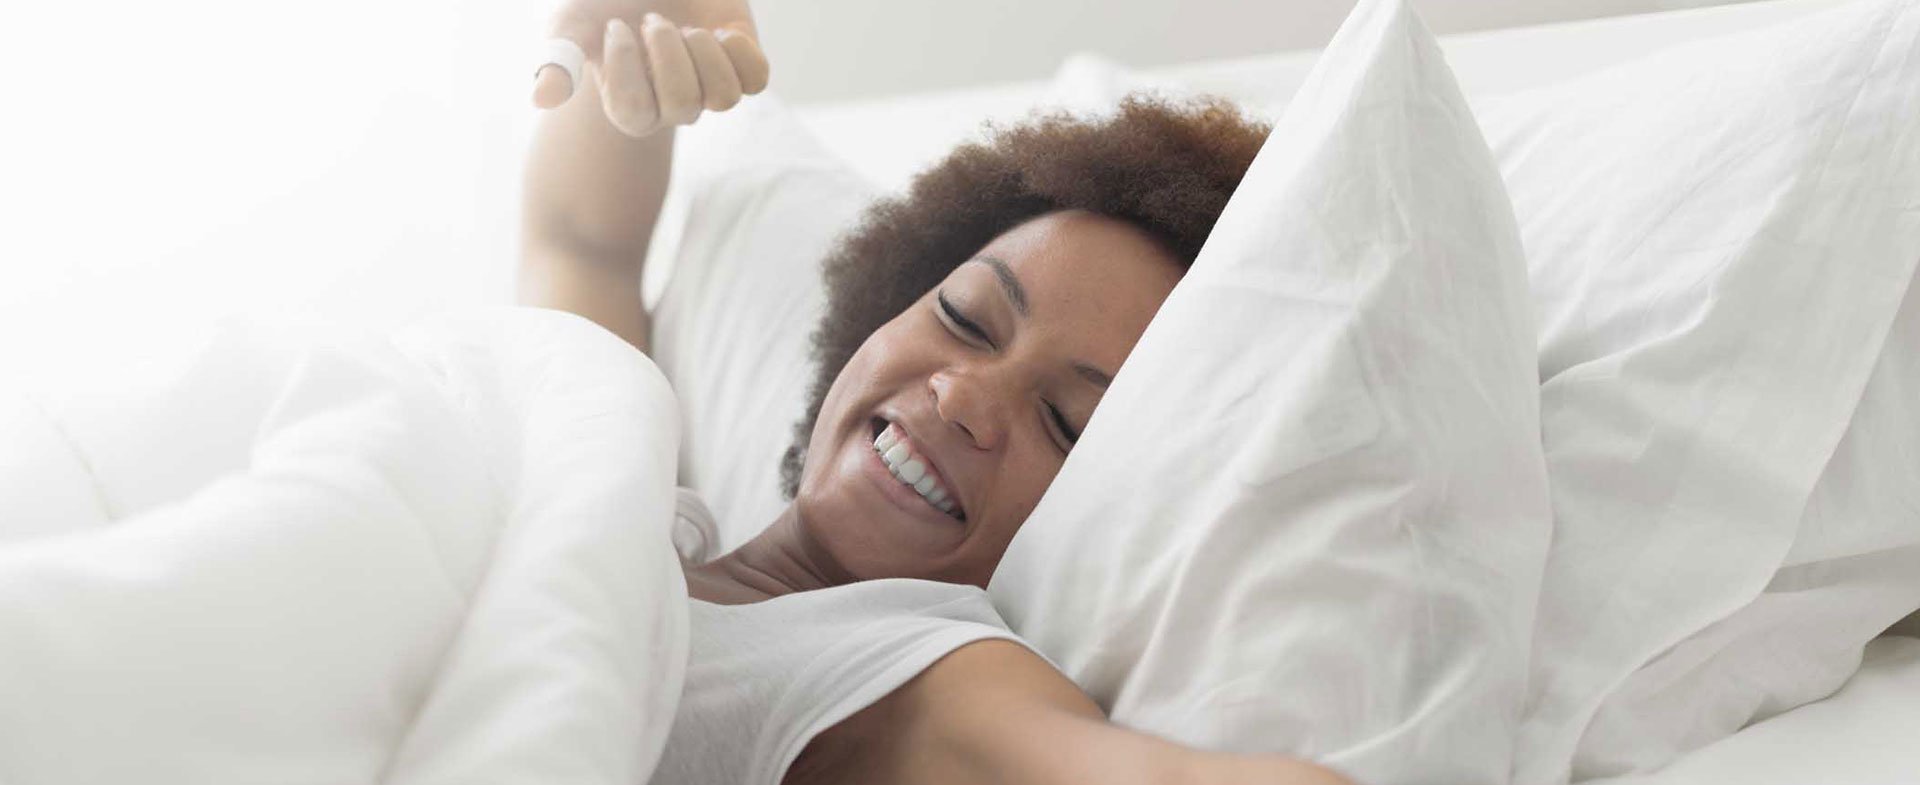 5 Tips To Waking Up Refreshed | Henry Ford Health - Detroit, MI